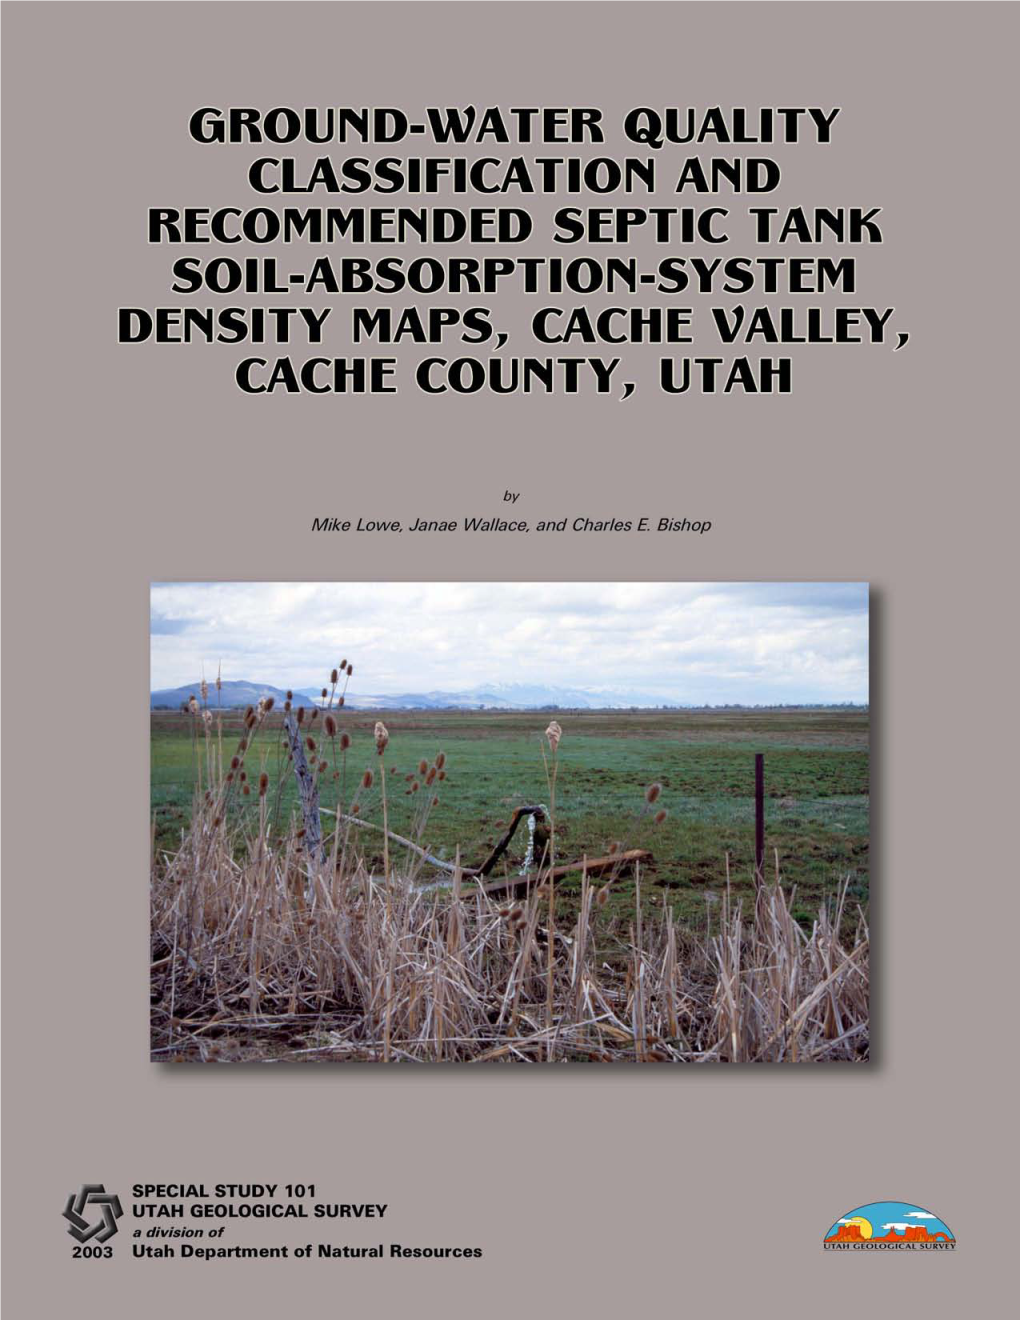 Ground-Water Quality Classification and Recommended Septic Tank Soil- Absorption-System Density Maps, Cache Valley, Cache County, Utah